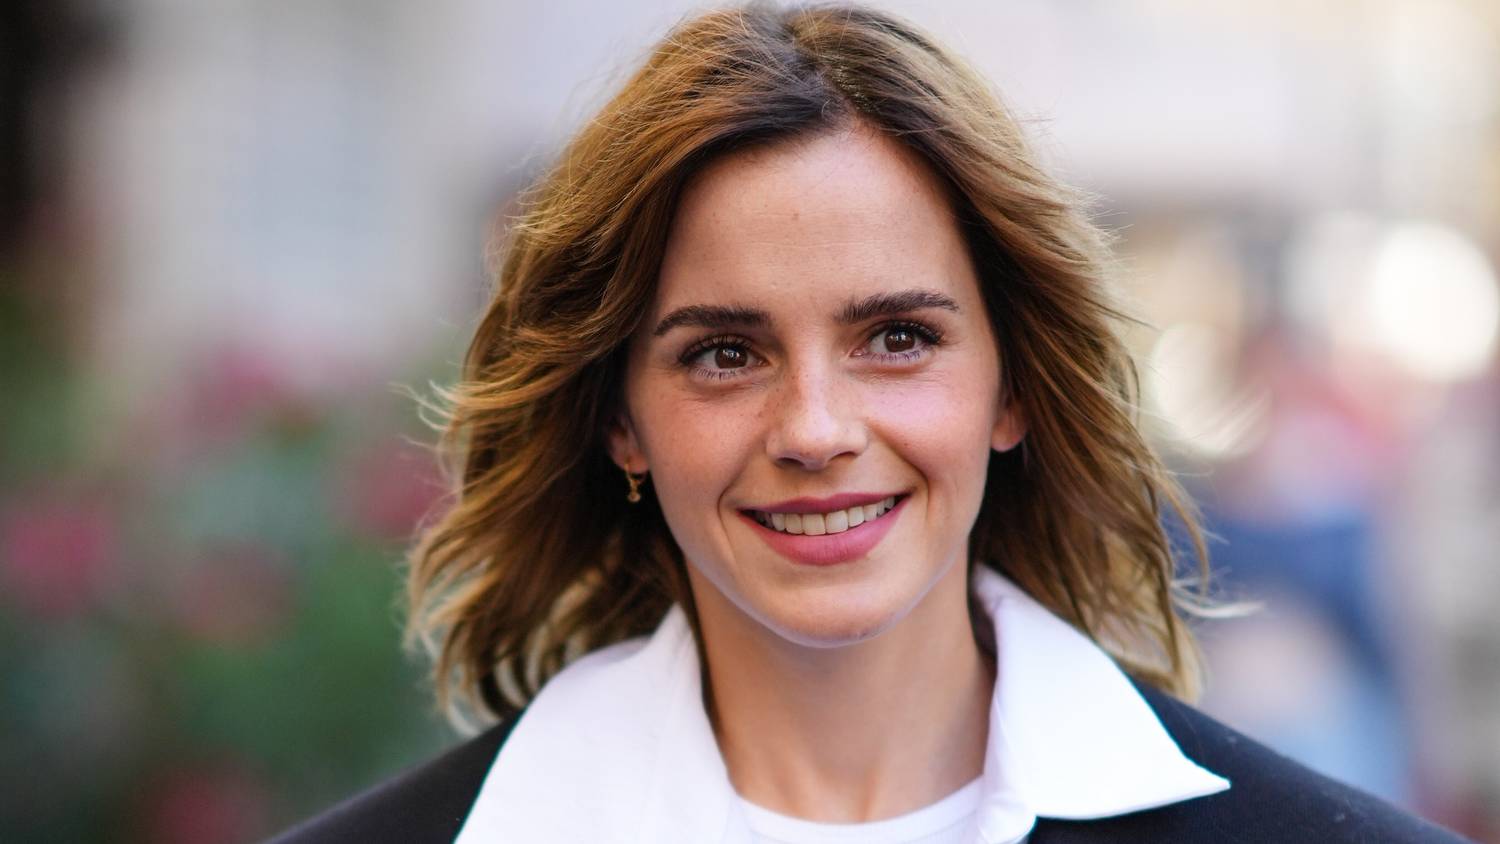 Velvet - Gummy - Emma Watson poses with short hair in a perfume campaign